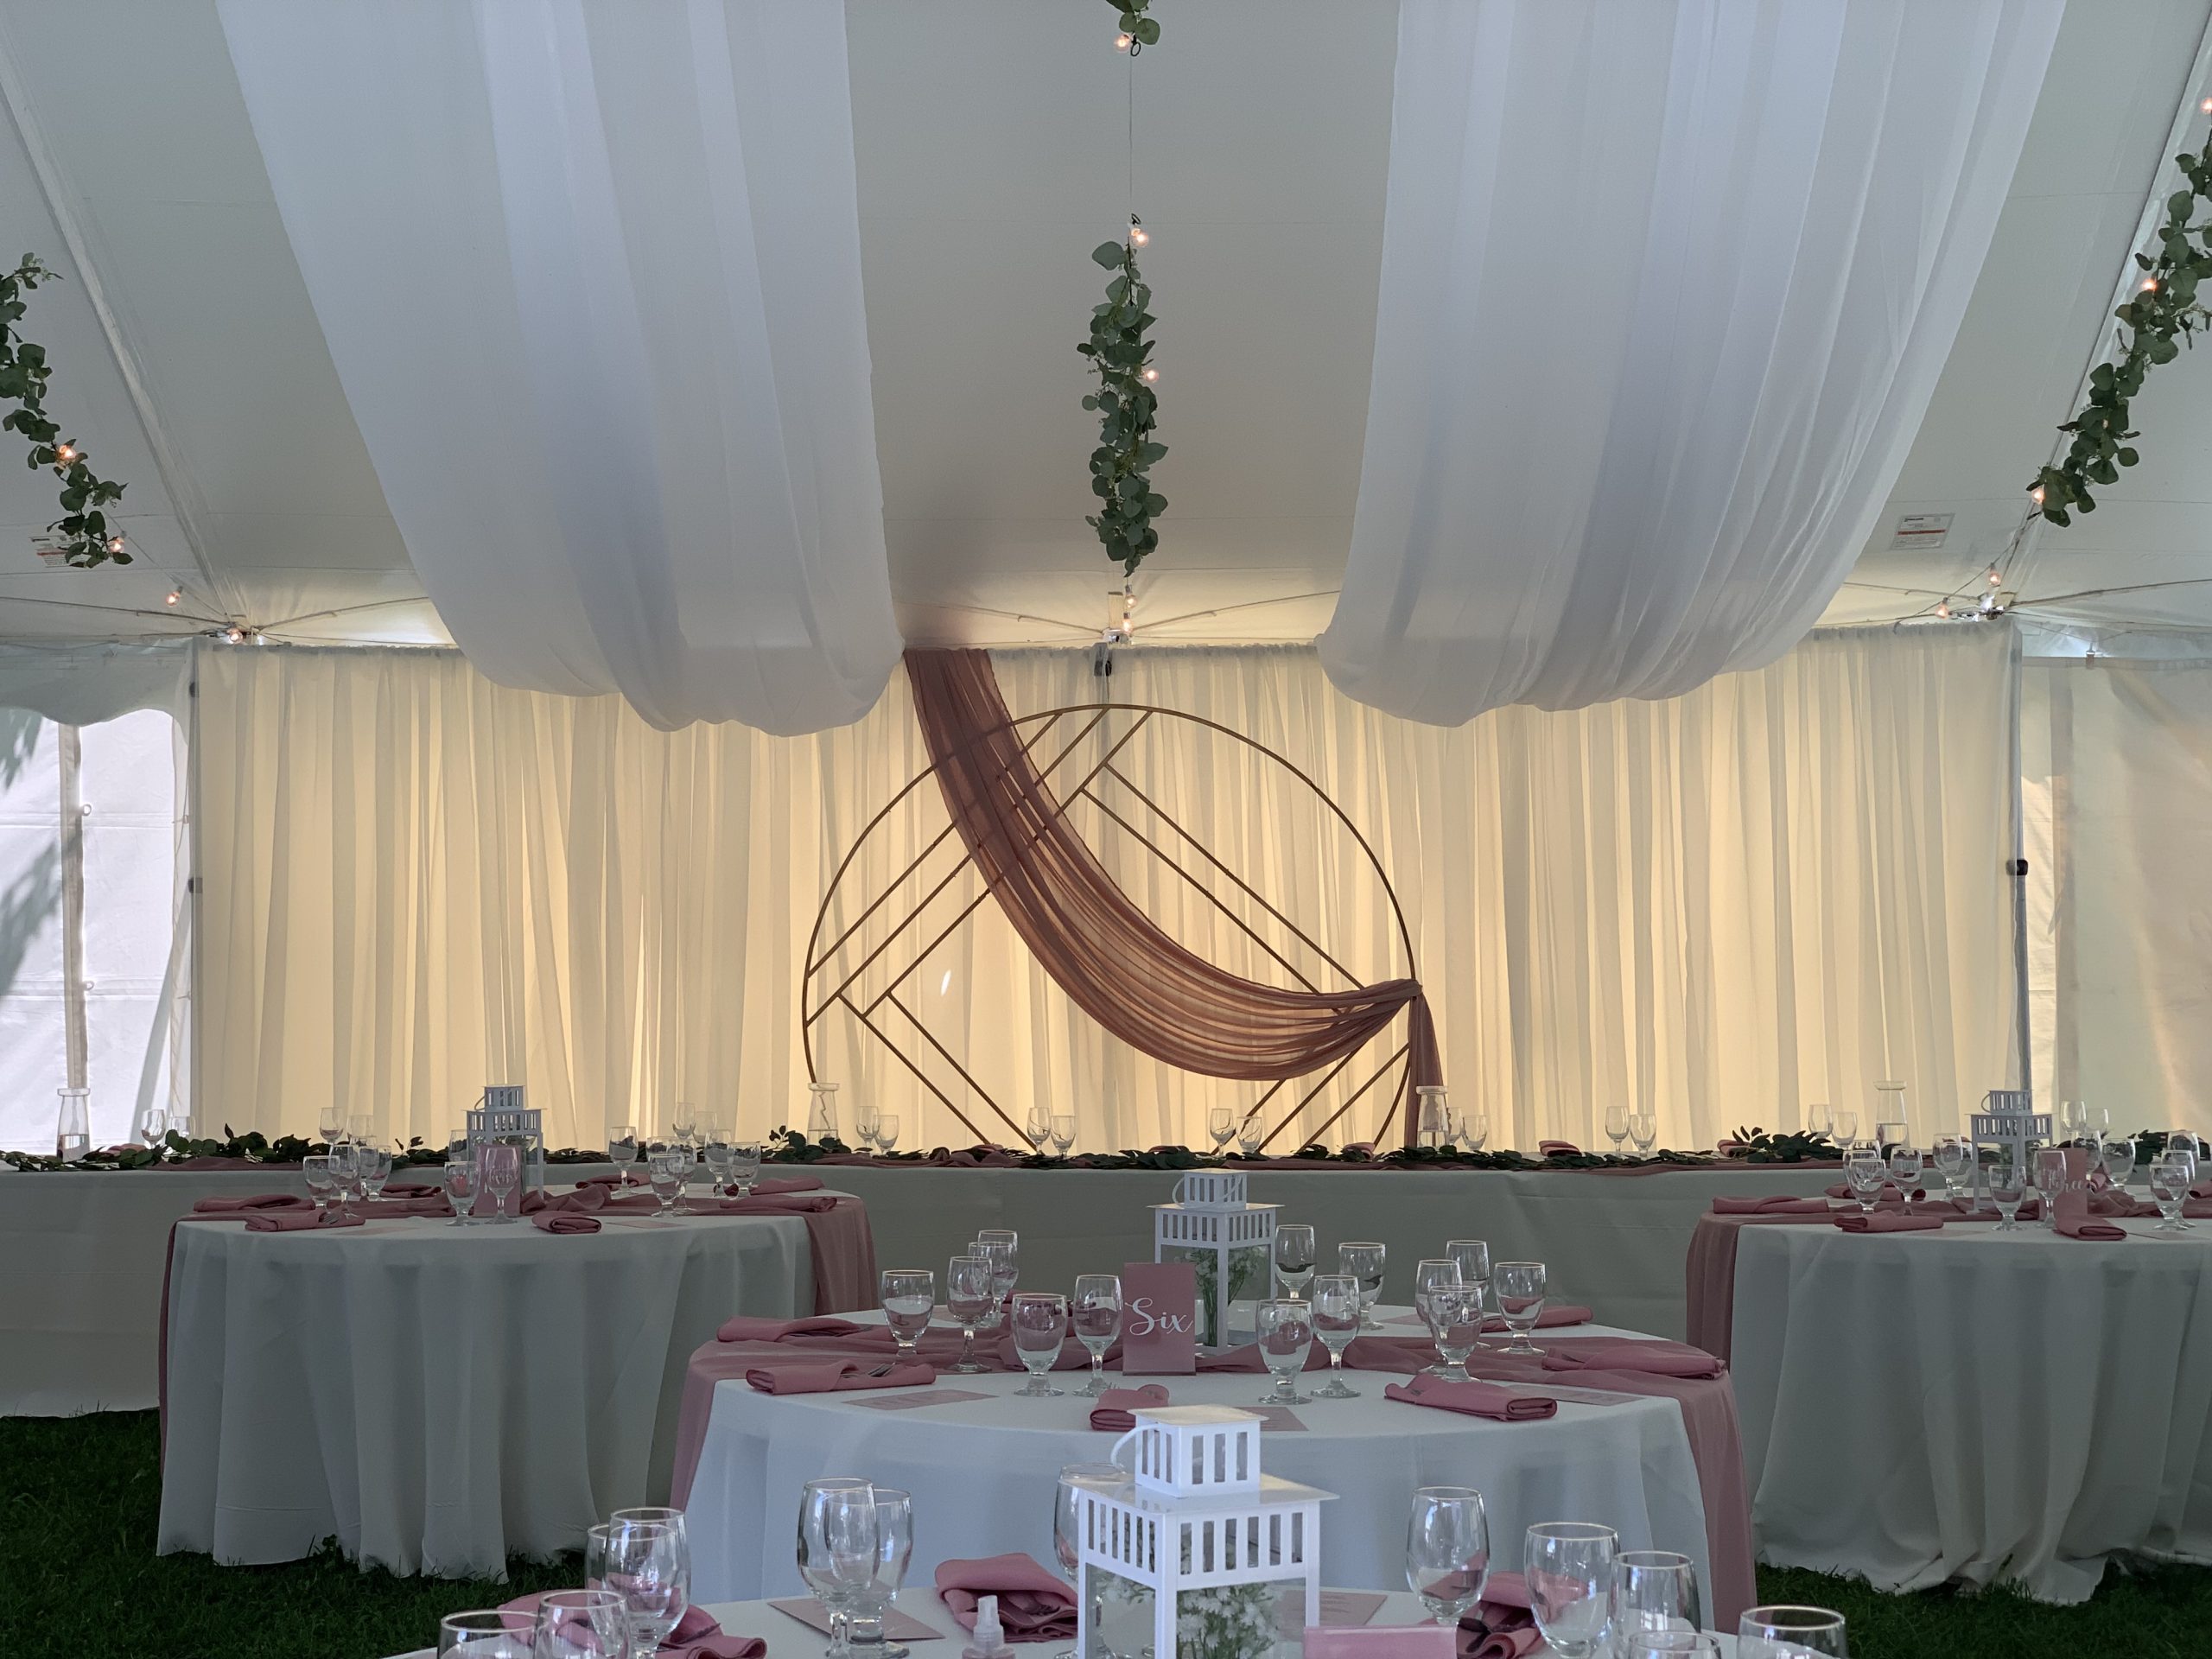 Gorgeous geometric arbour and soft blush linens used as wedding decor.